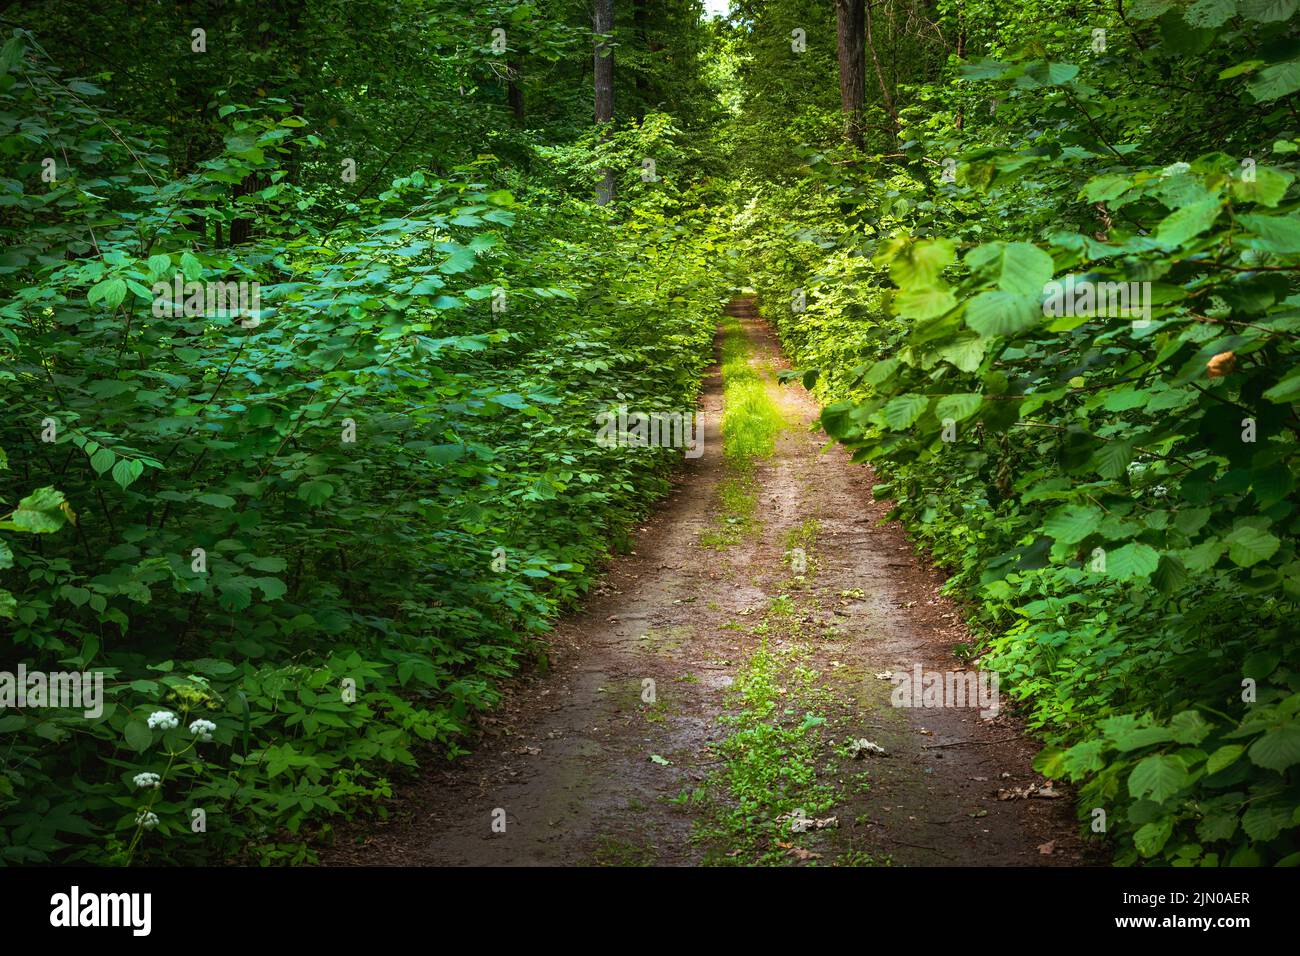 Dirt road in a thick green deciduous forest Stock Photo